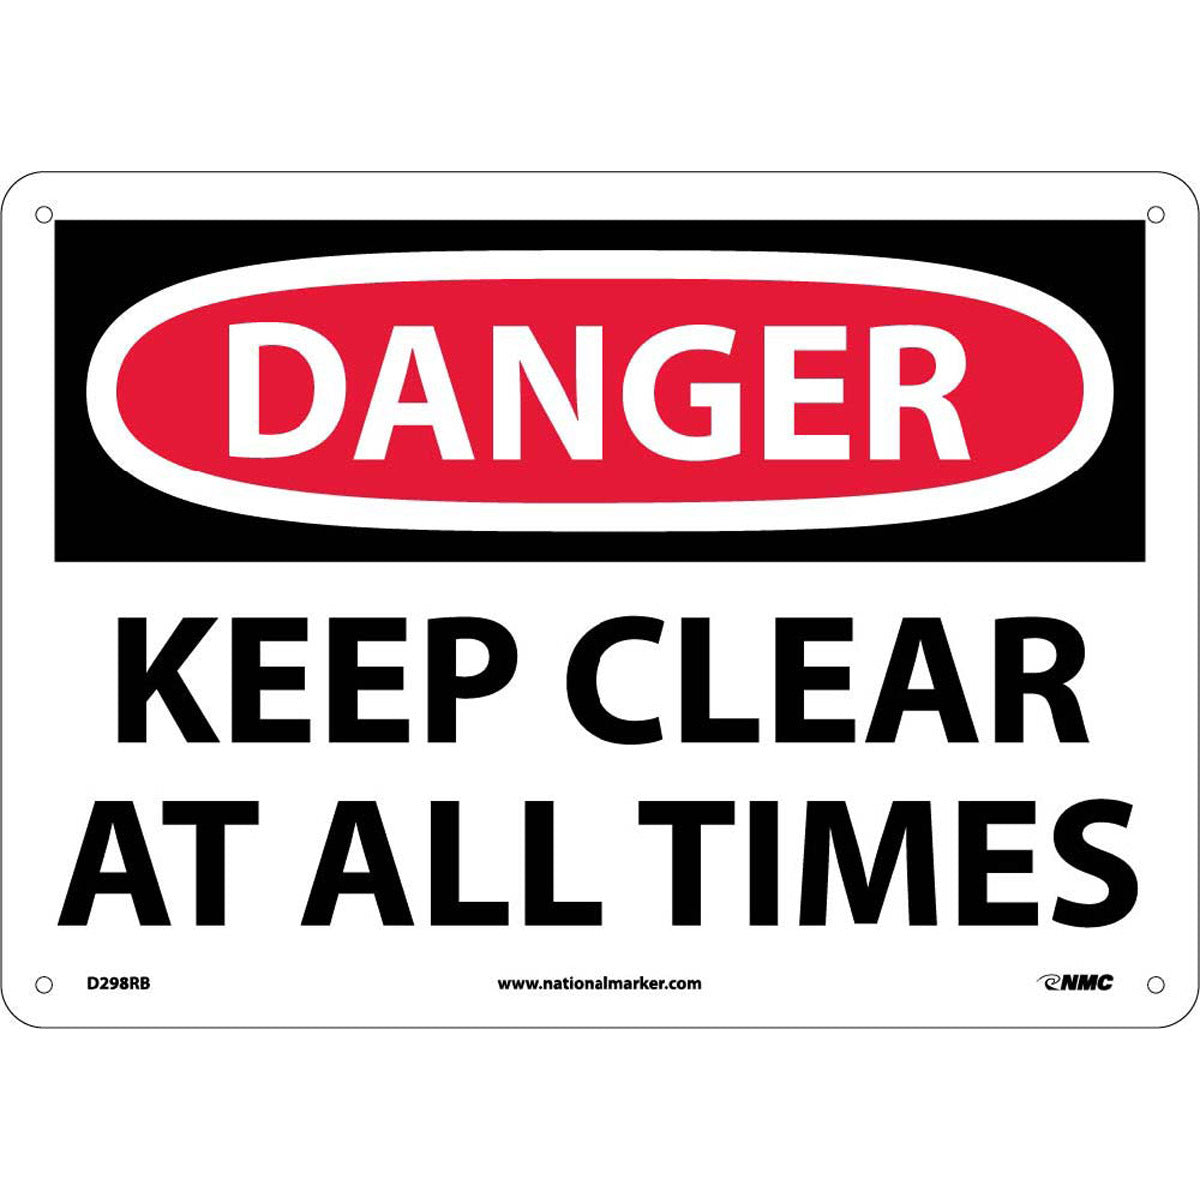 NM 10" X 14" White .05" Rigid Plastic Danger Sign "DANGER KEEP CLEAR AT ALL TIMES"